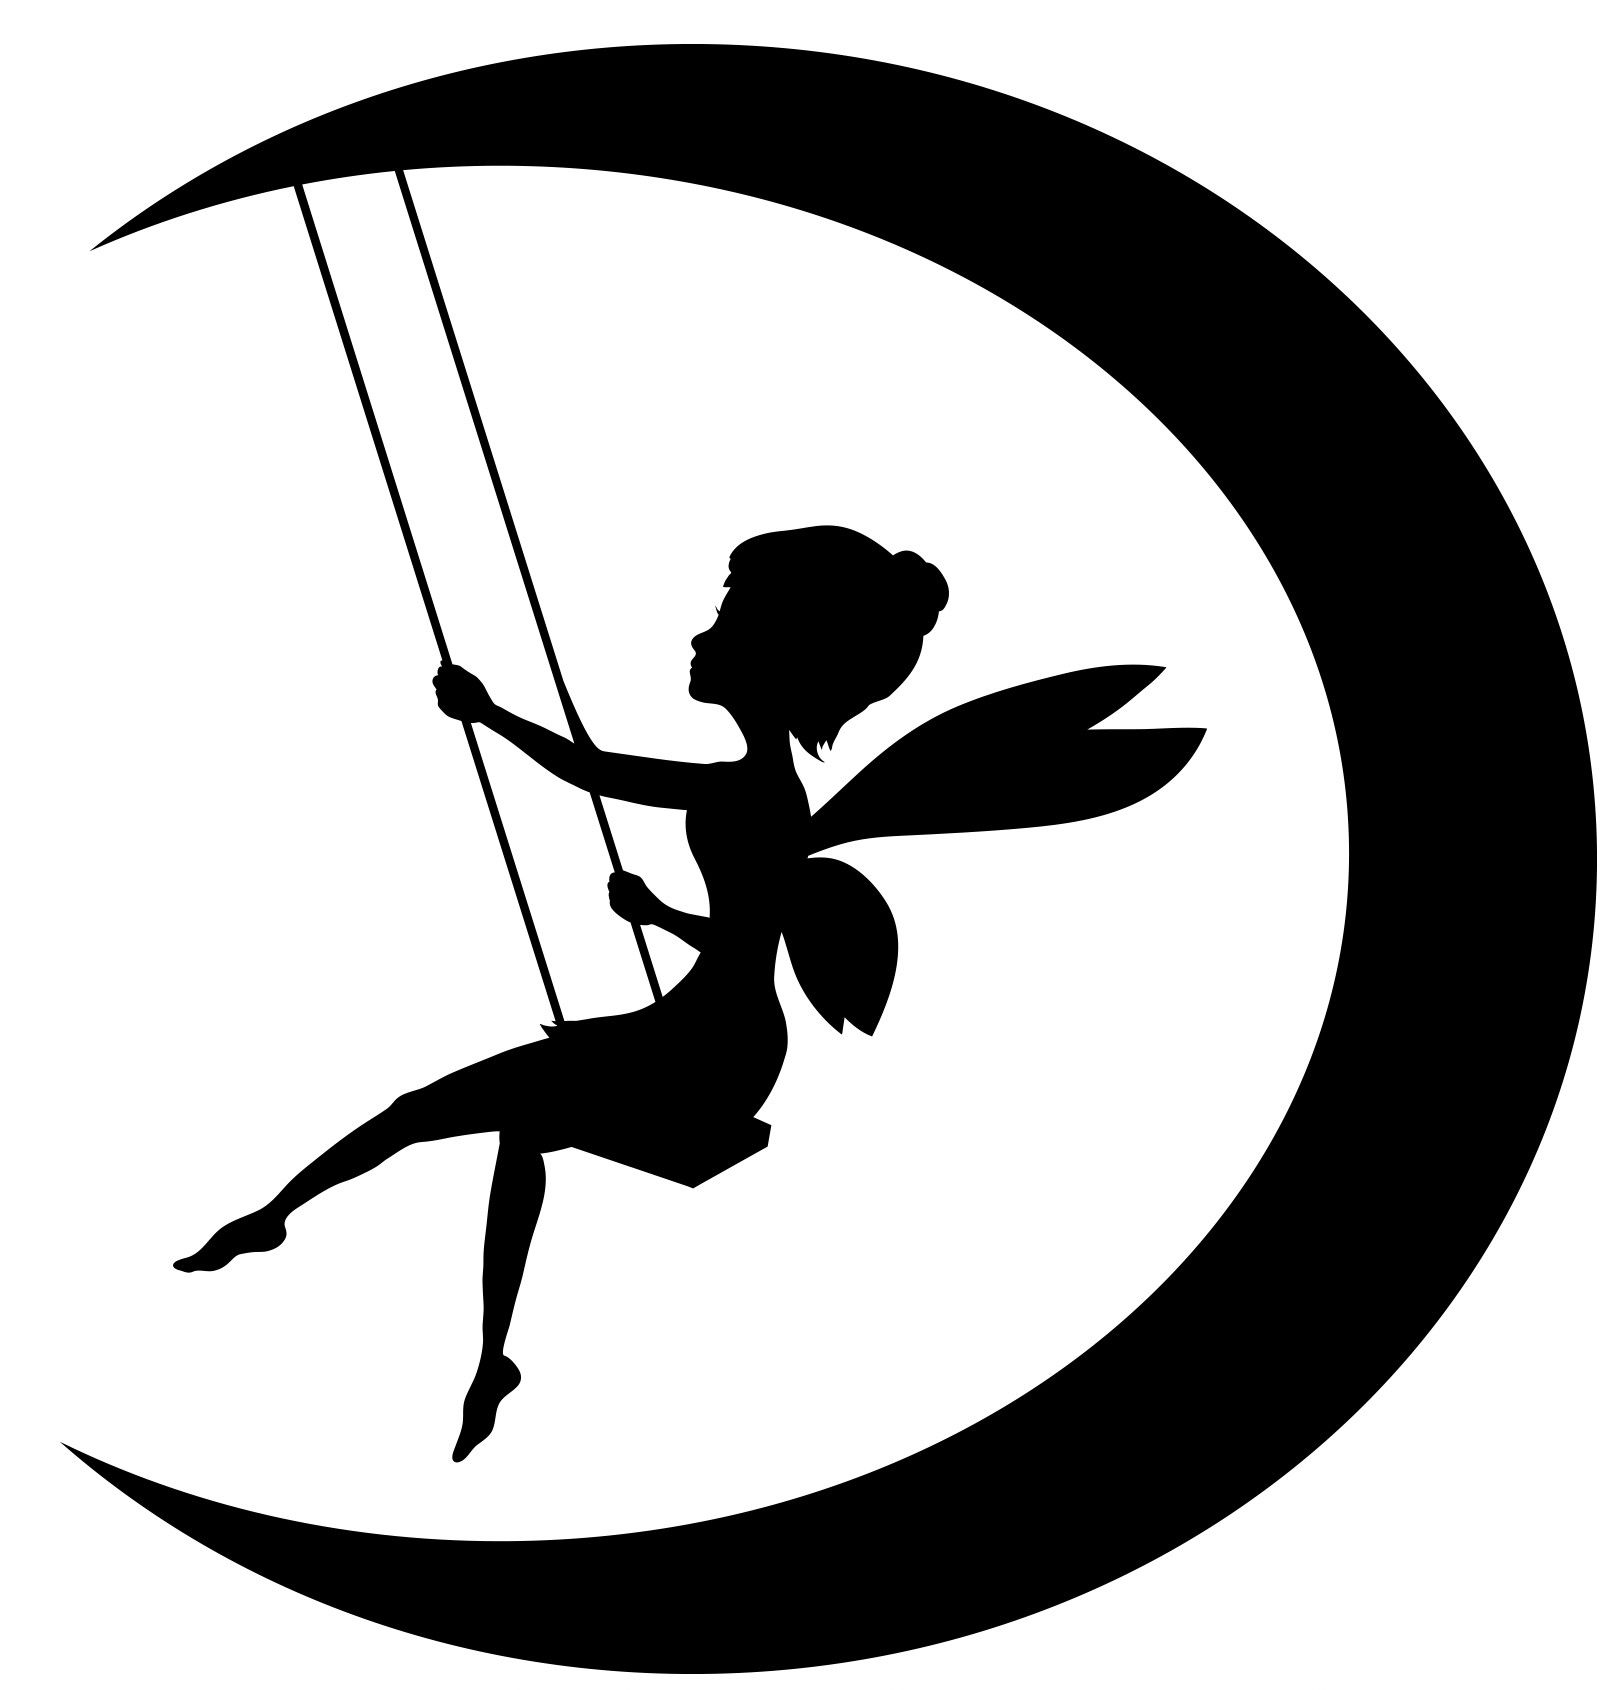 Viewing gallery for fairy. Fairies clipart moon